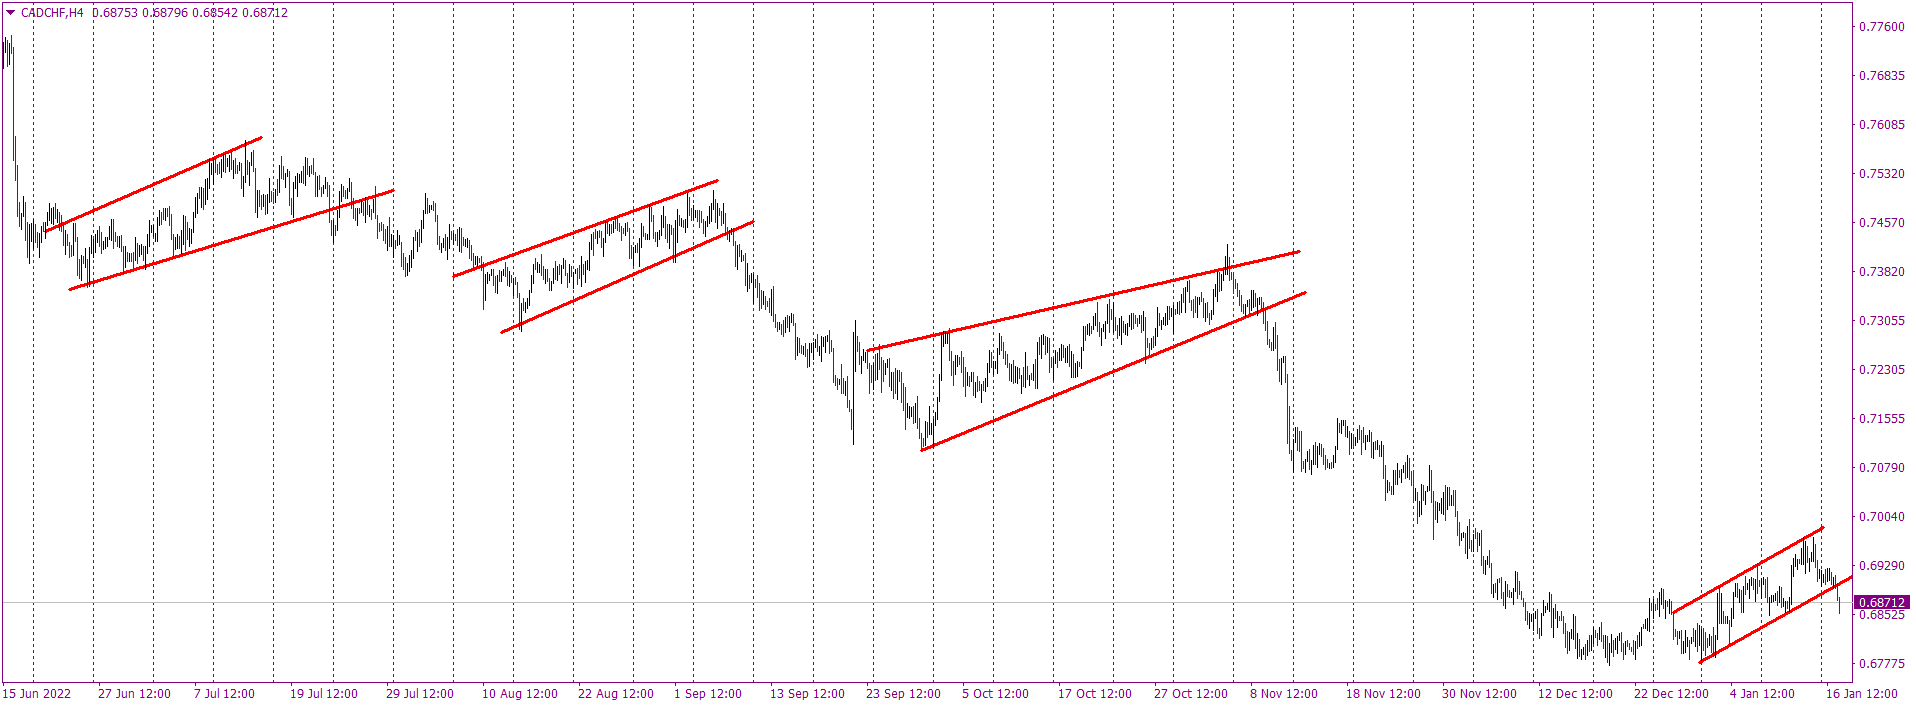 CADCHF escapes flag to downside